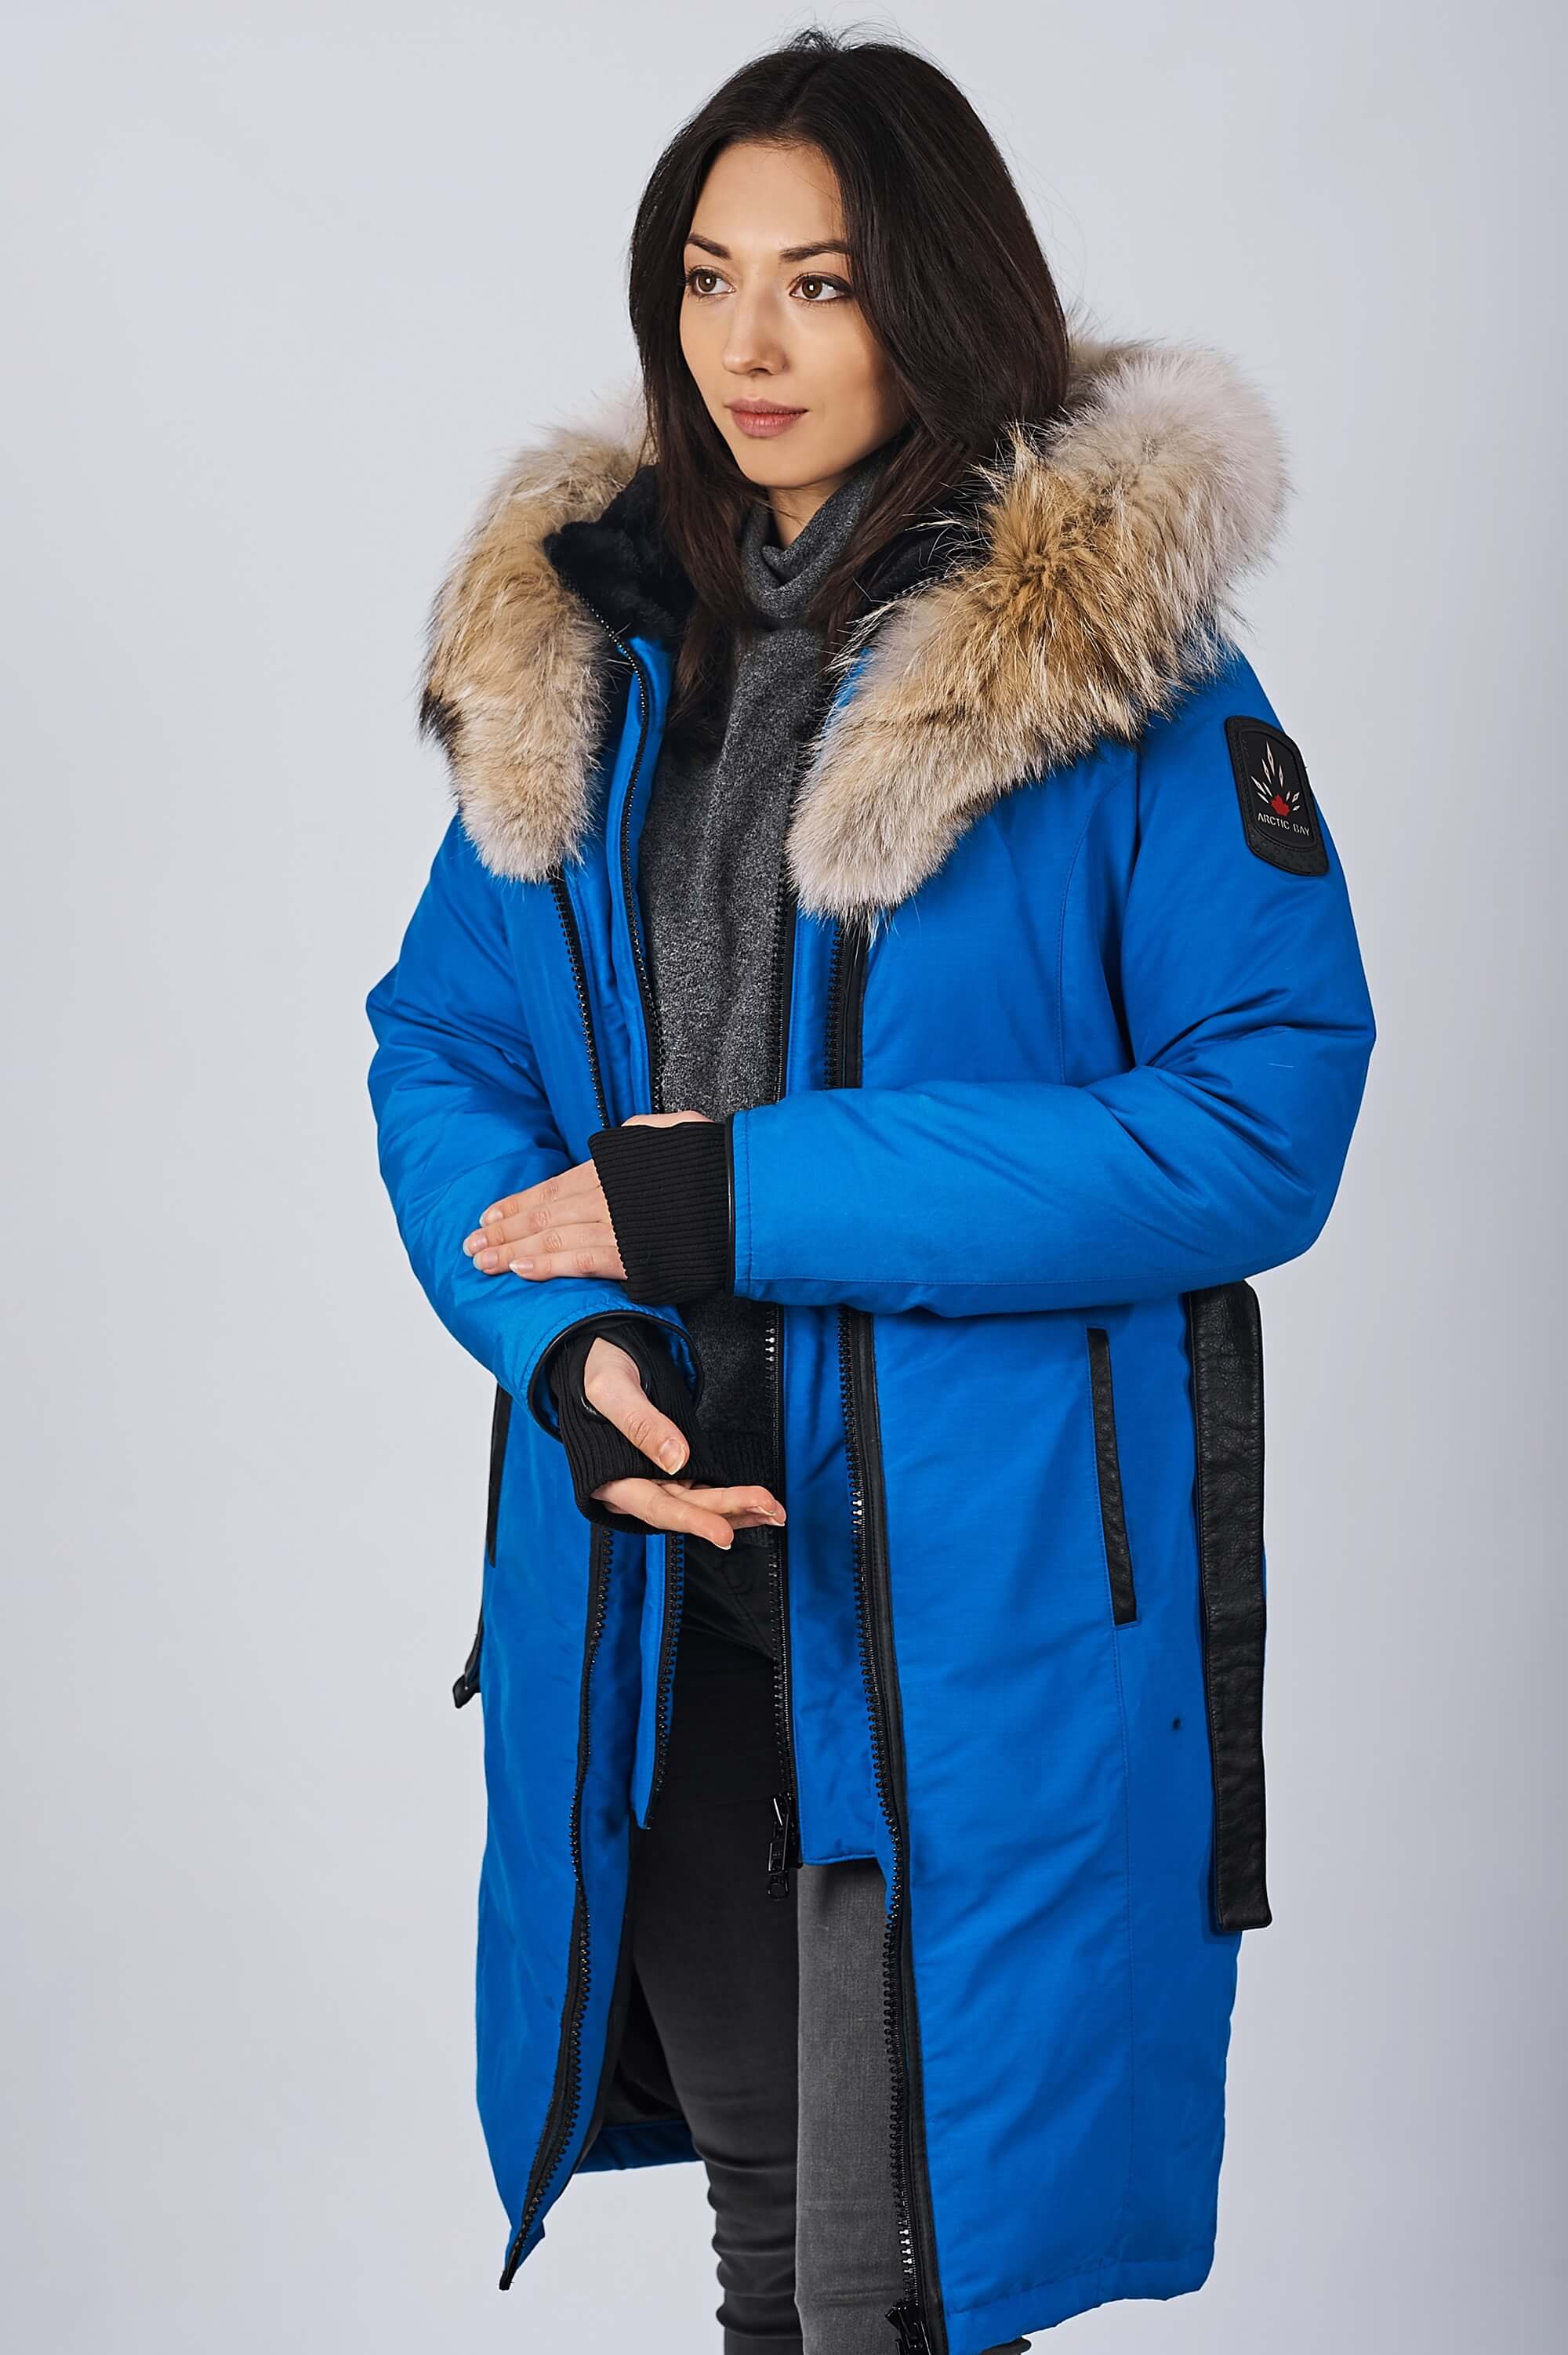 Winter Jackets for Women, Luxury parkas made in Canada